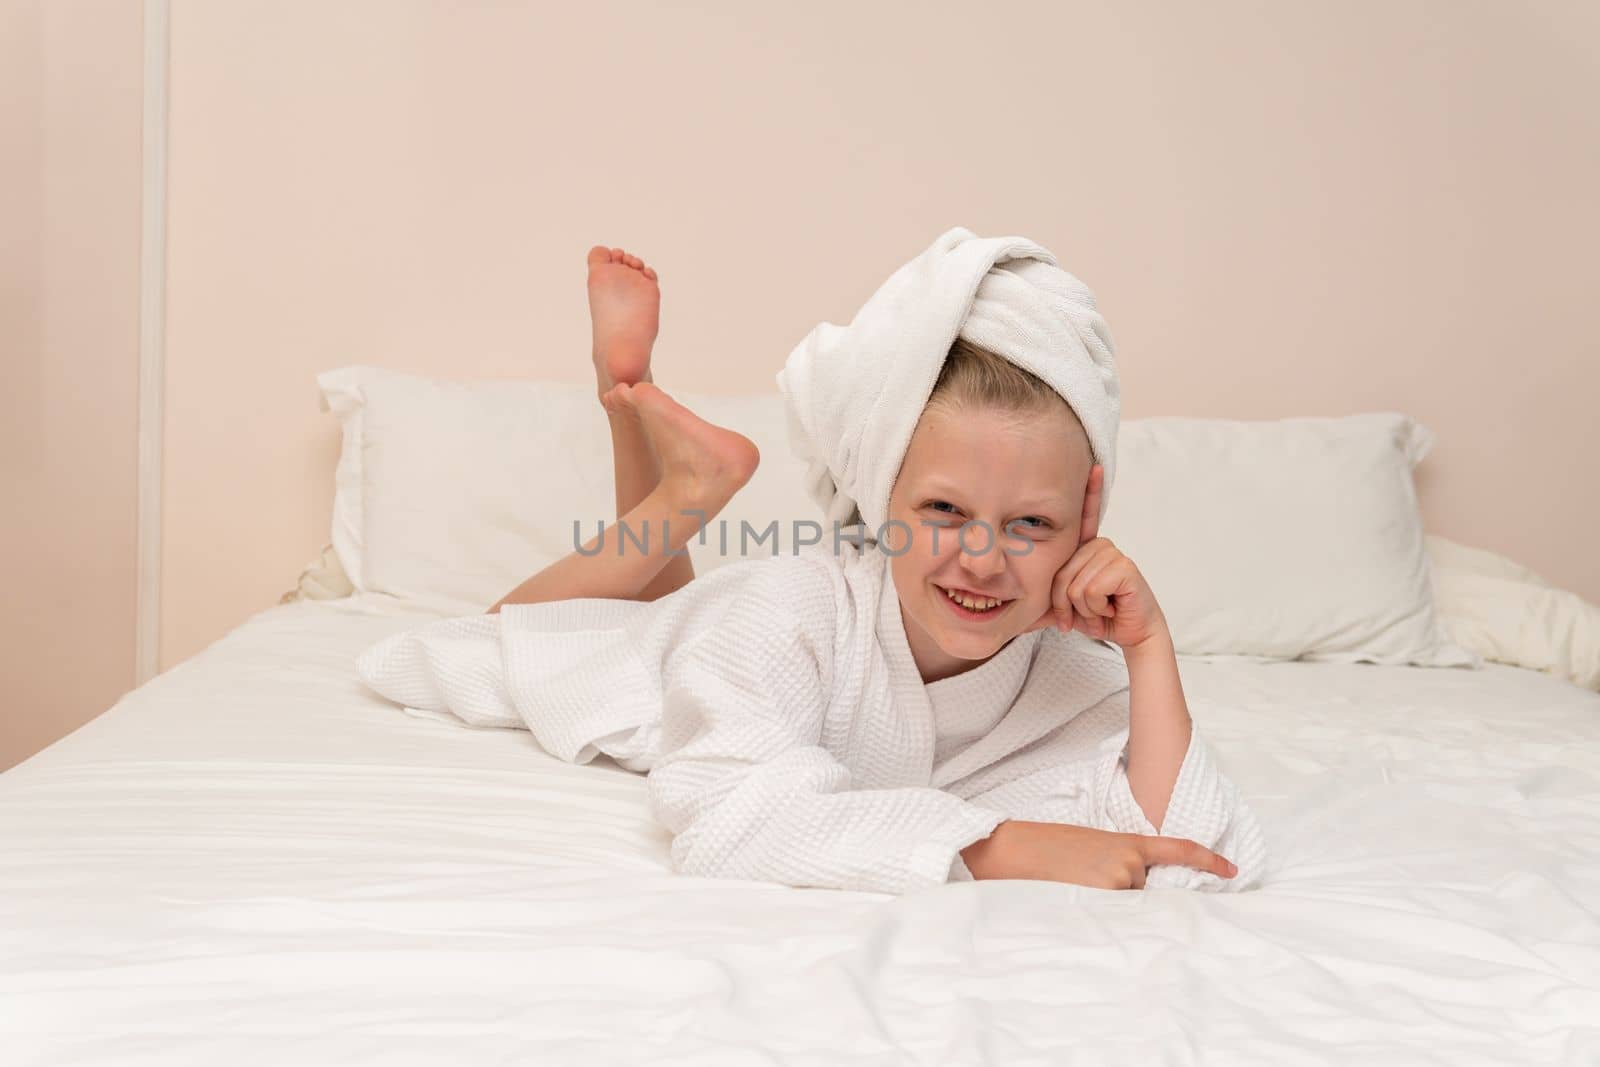 Smiling thinks coffee smile elbows Creek copyspace bathrobe white portrait, for people lifestyle for young from happy caucasian, little child. Care health funny, by 89167702191